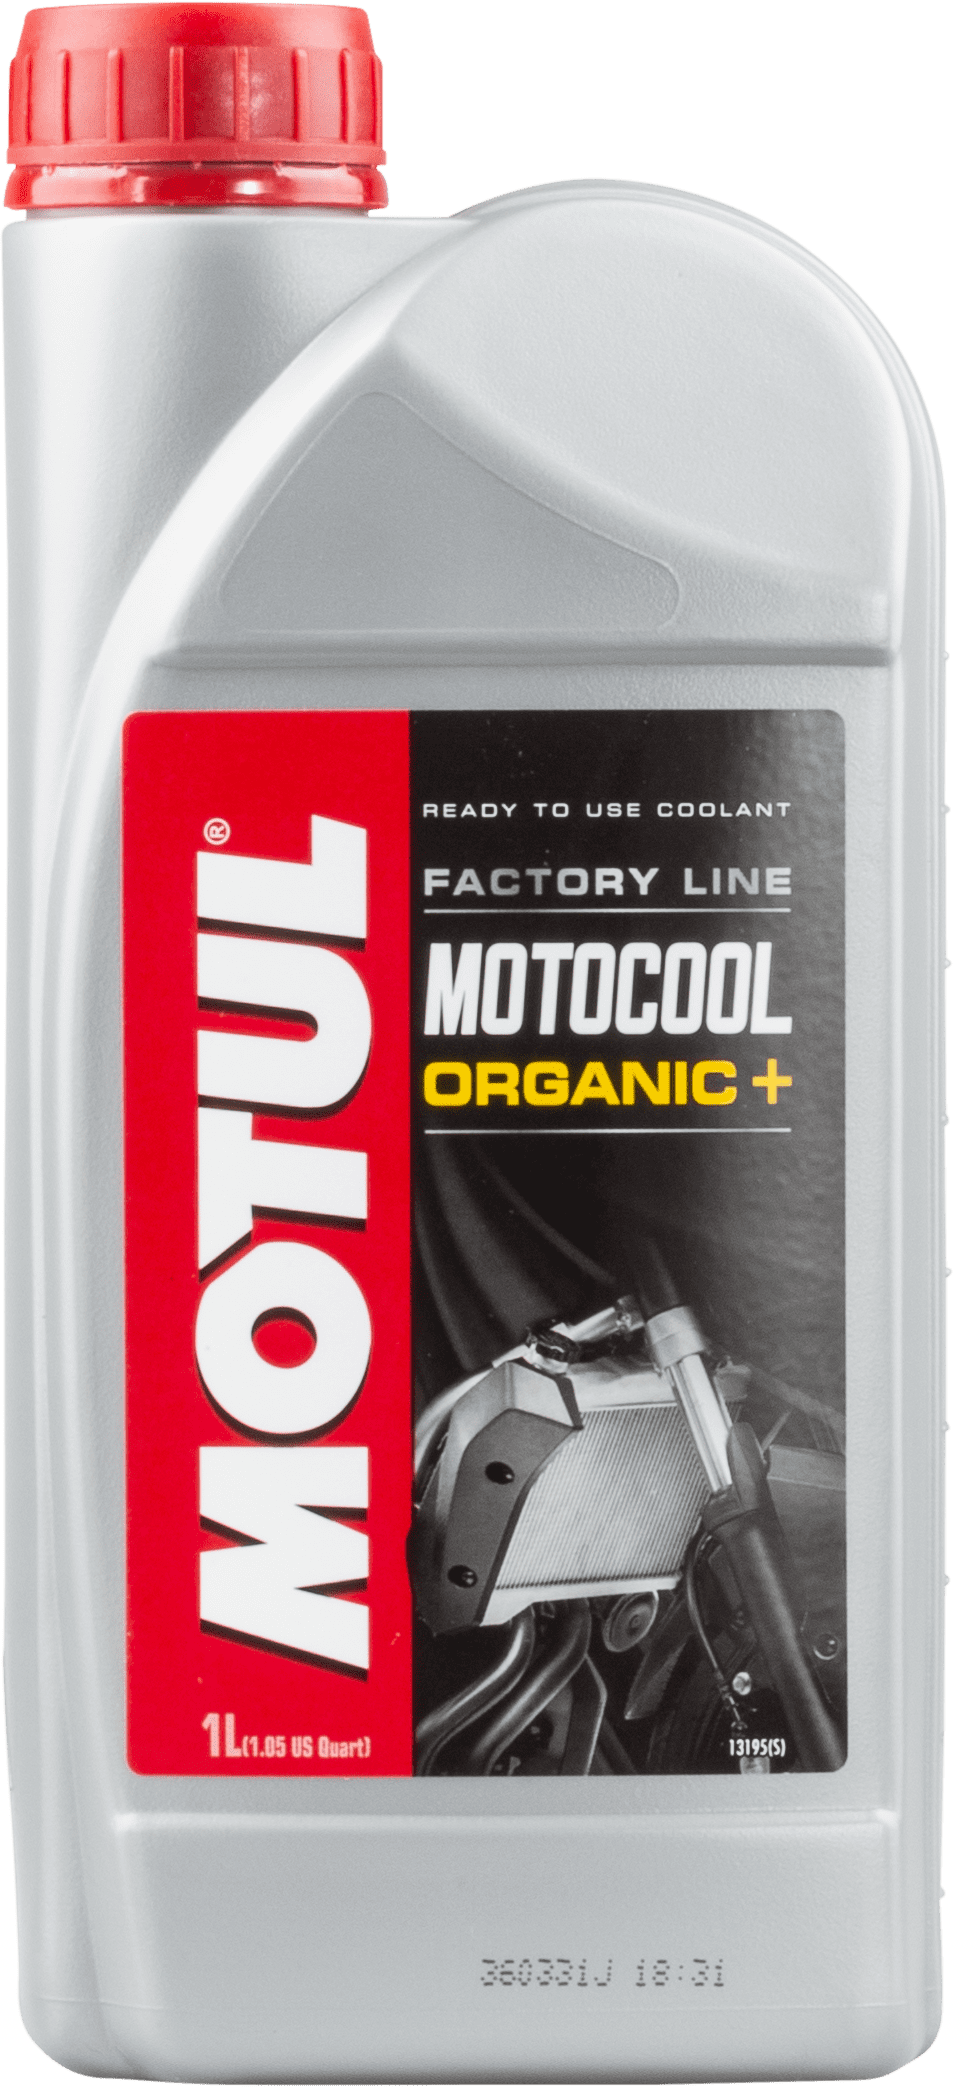 105920-1 Ready to use coolant (do not dilute) for motorcycles. Nitrite free, amine free, phosphate free, borate free, silicate free.